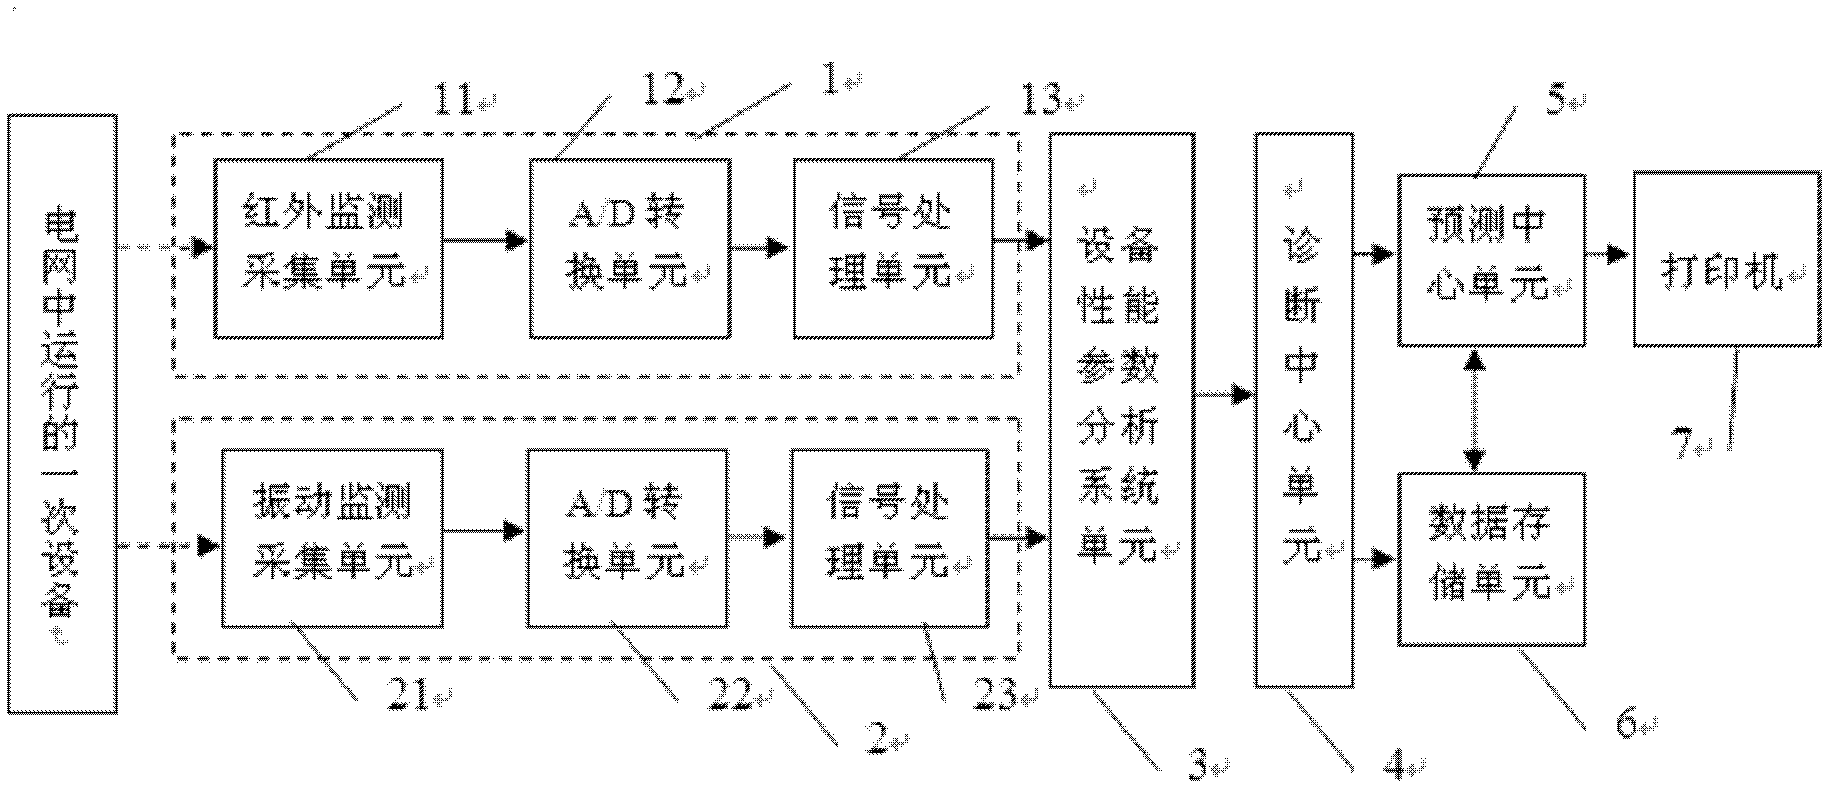 Method and device for monitoring operation conditions of power primary equipment